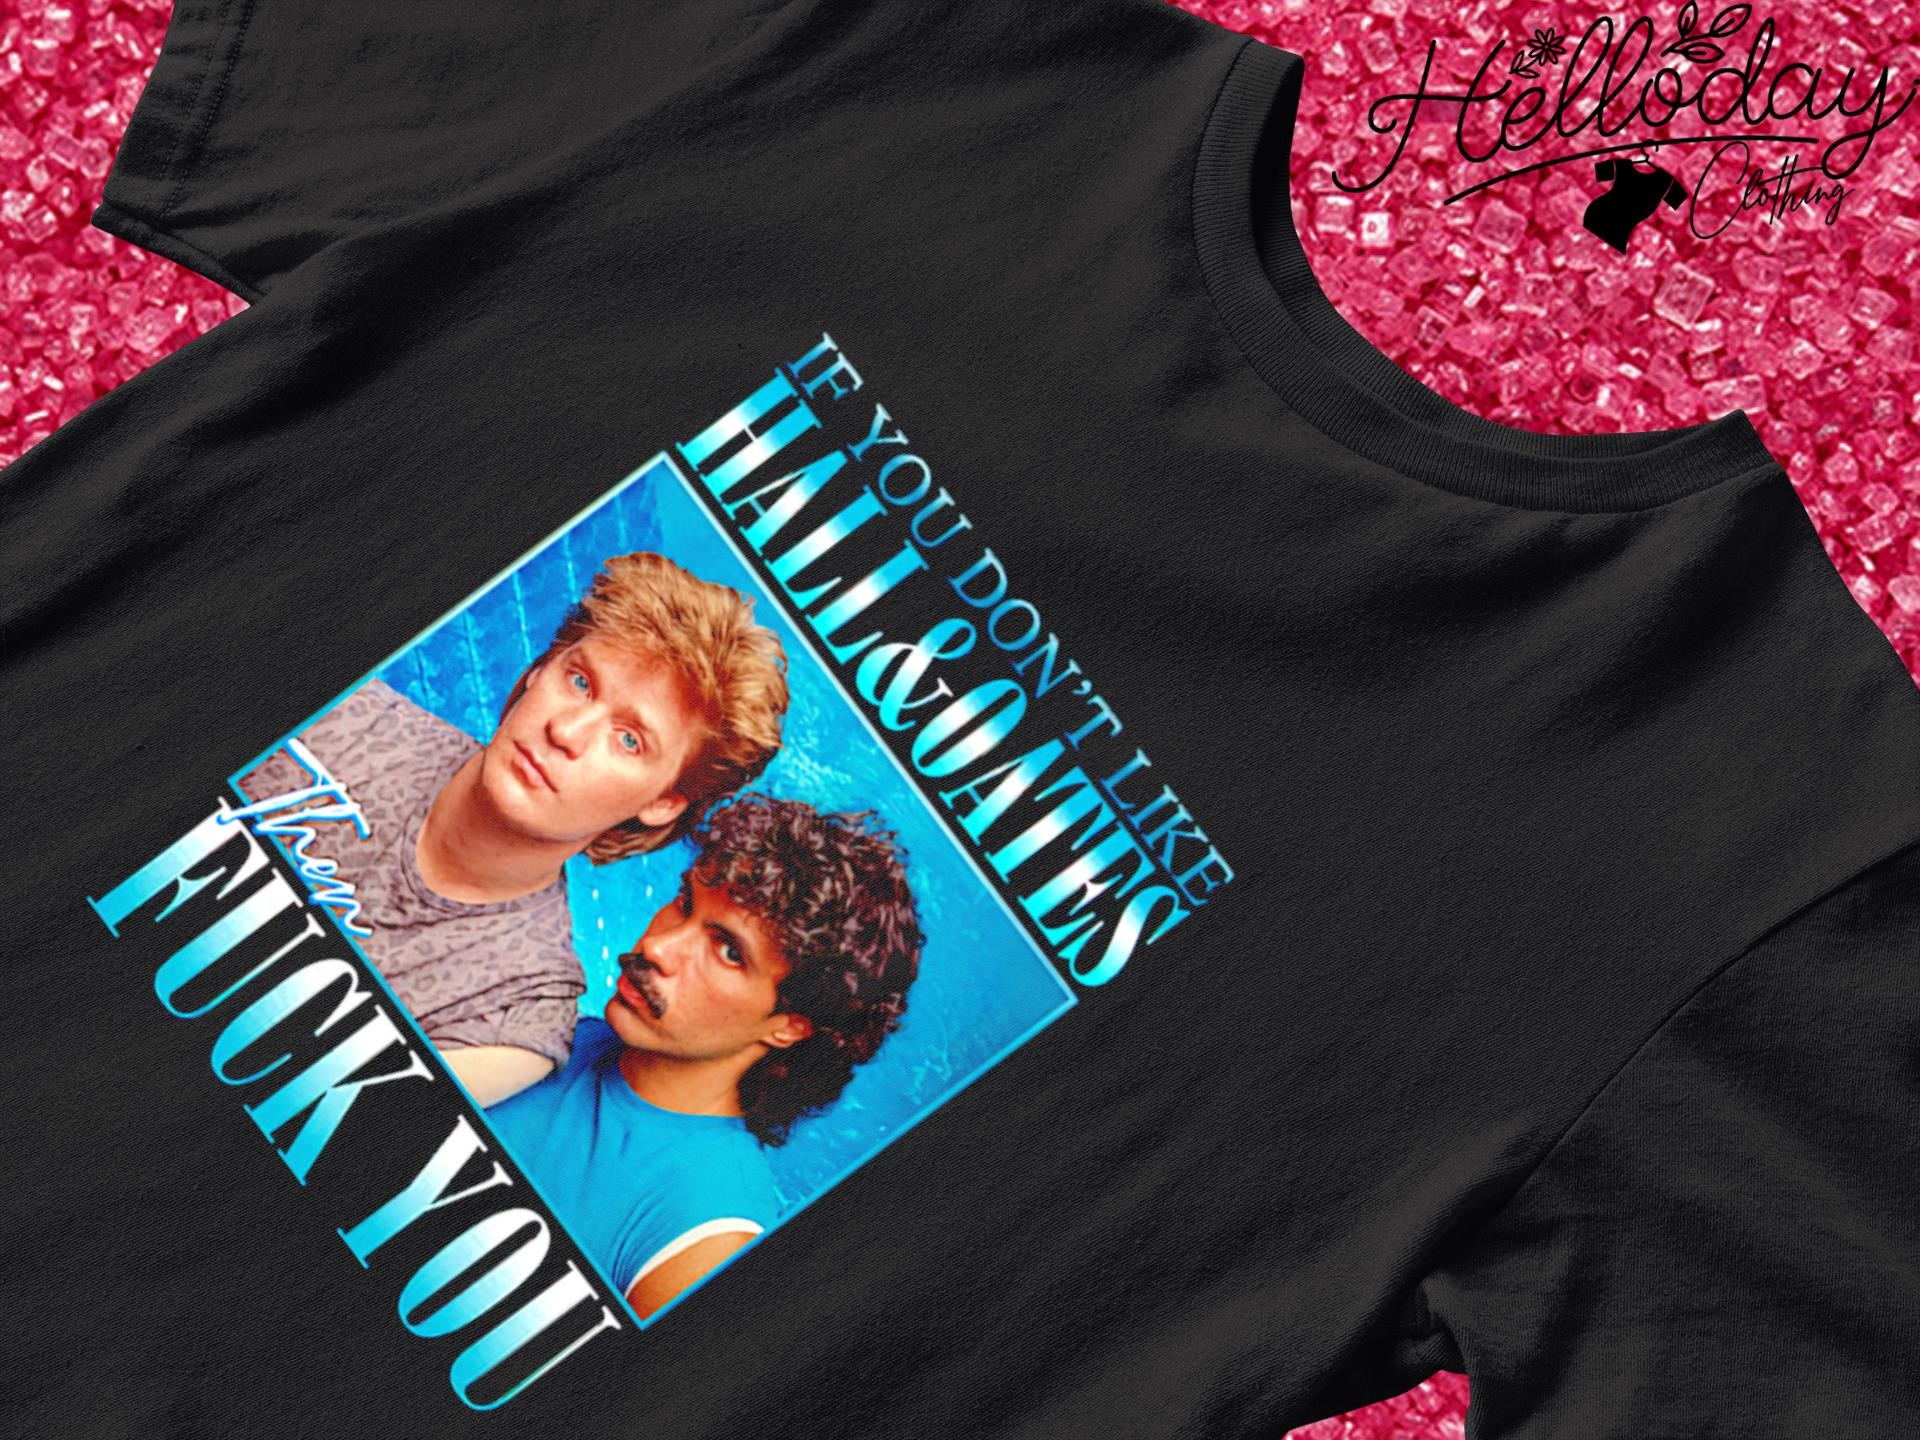 If you don’t like Hall and Oates then fuck you shirt